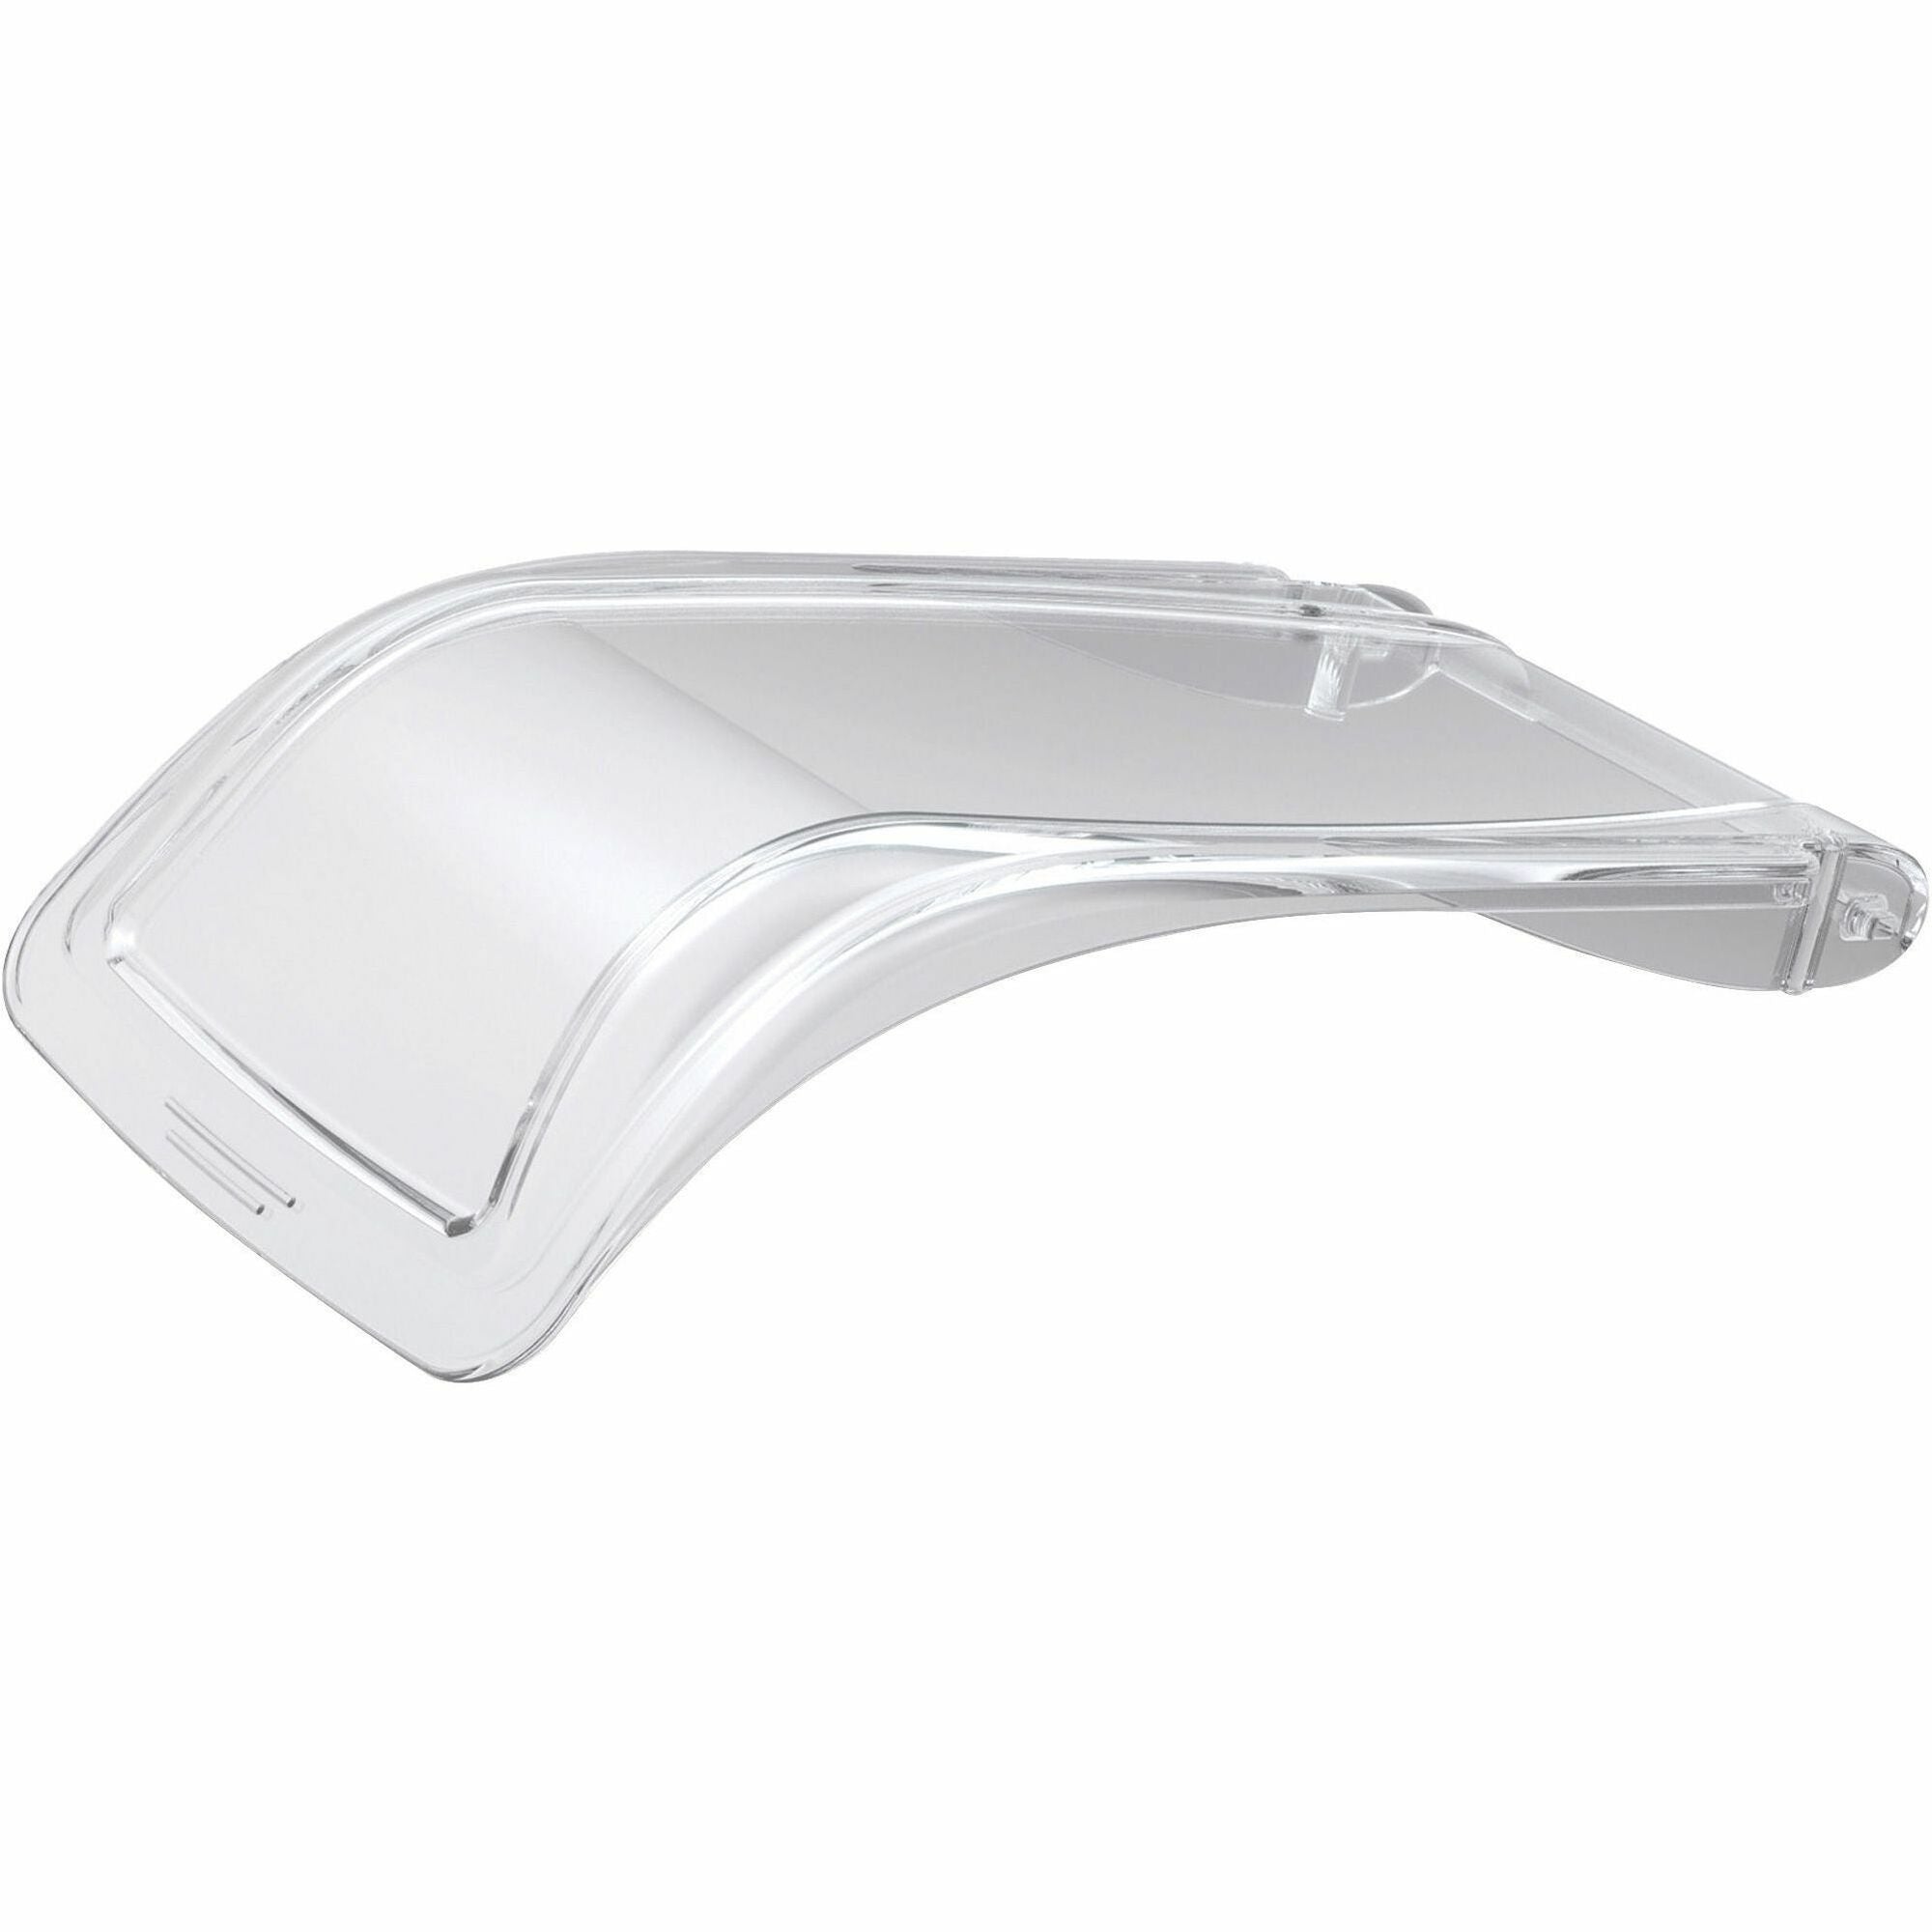 Akro-Mils InSight Lid - Rectangular - Polycarbonate - 1 Each - Clear - 